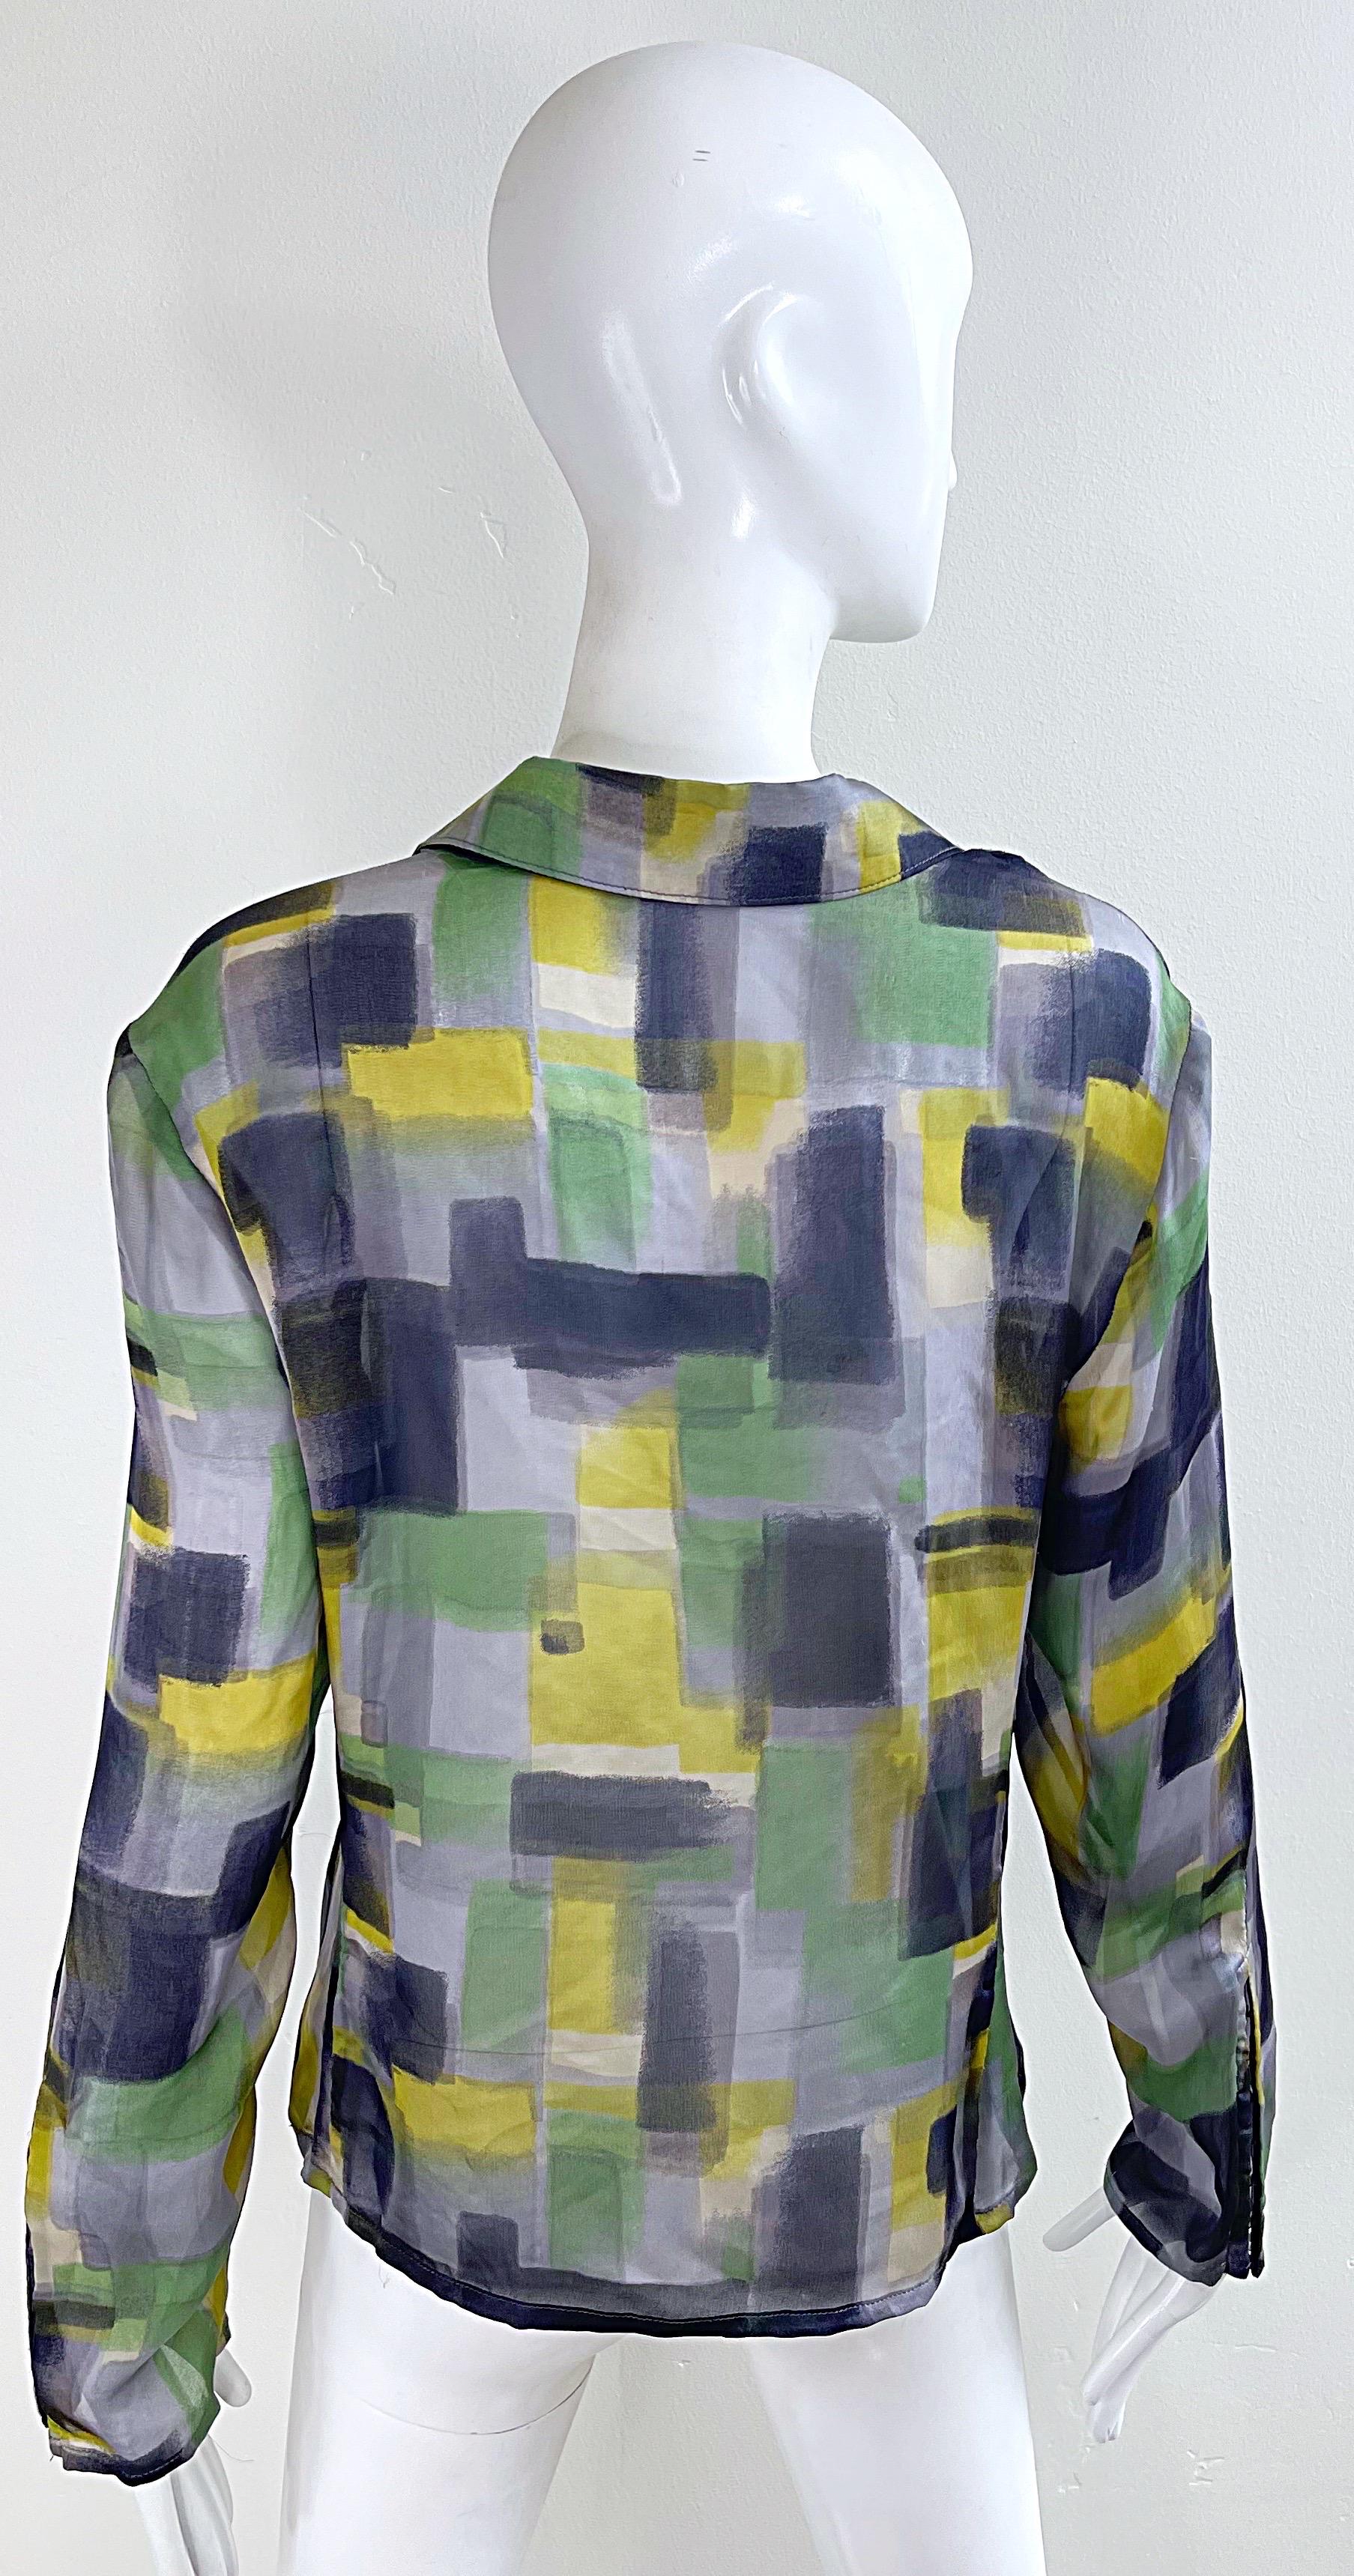 NWT Zenobia Saks 5th Avenue Size 12 Sheer Silk Chiffon Abstract Print Blouse Top For Sale 14